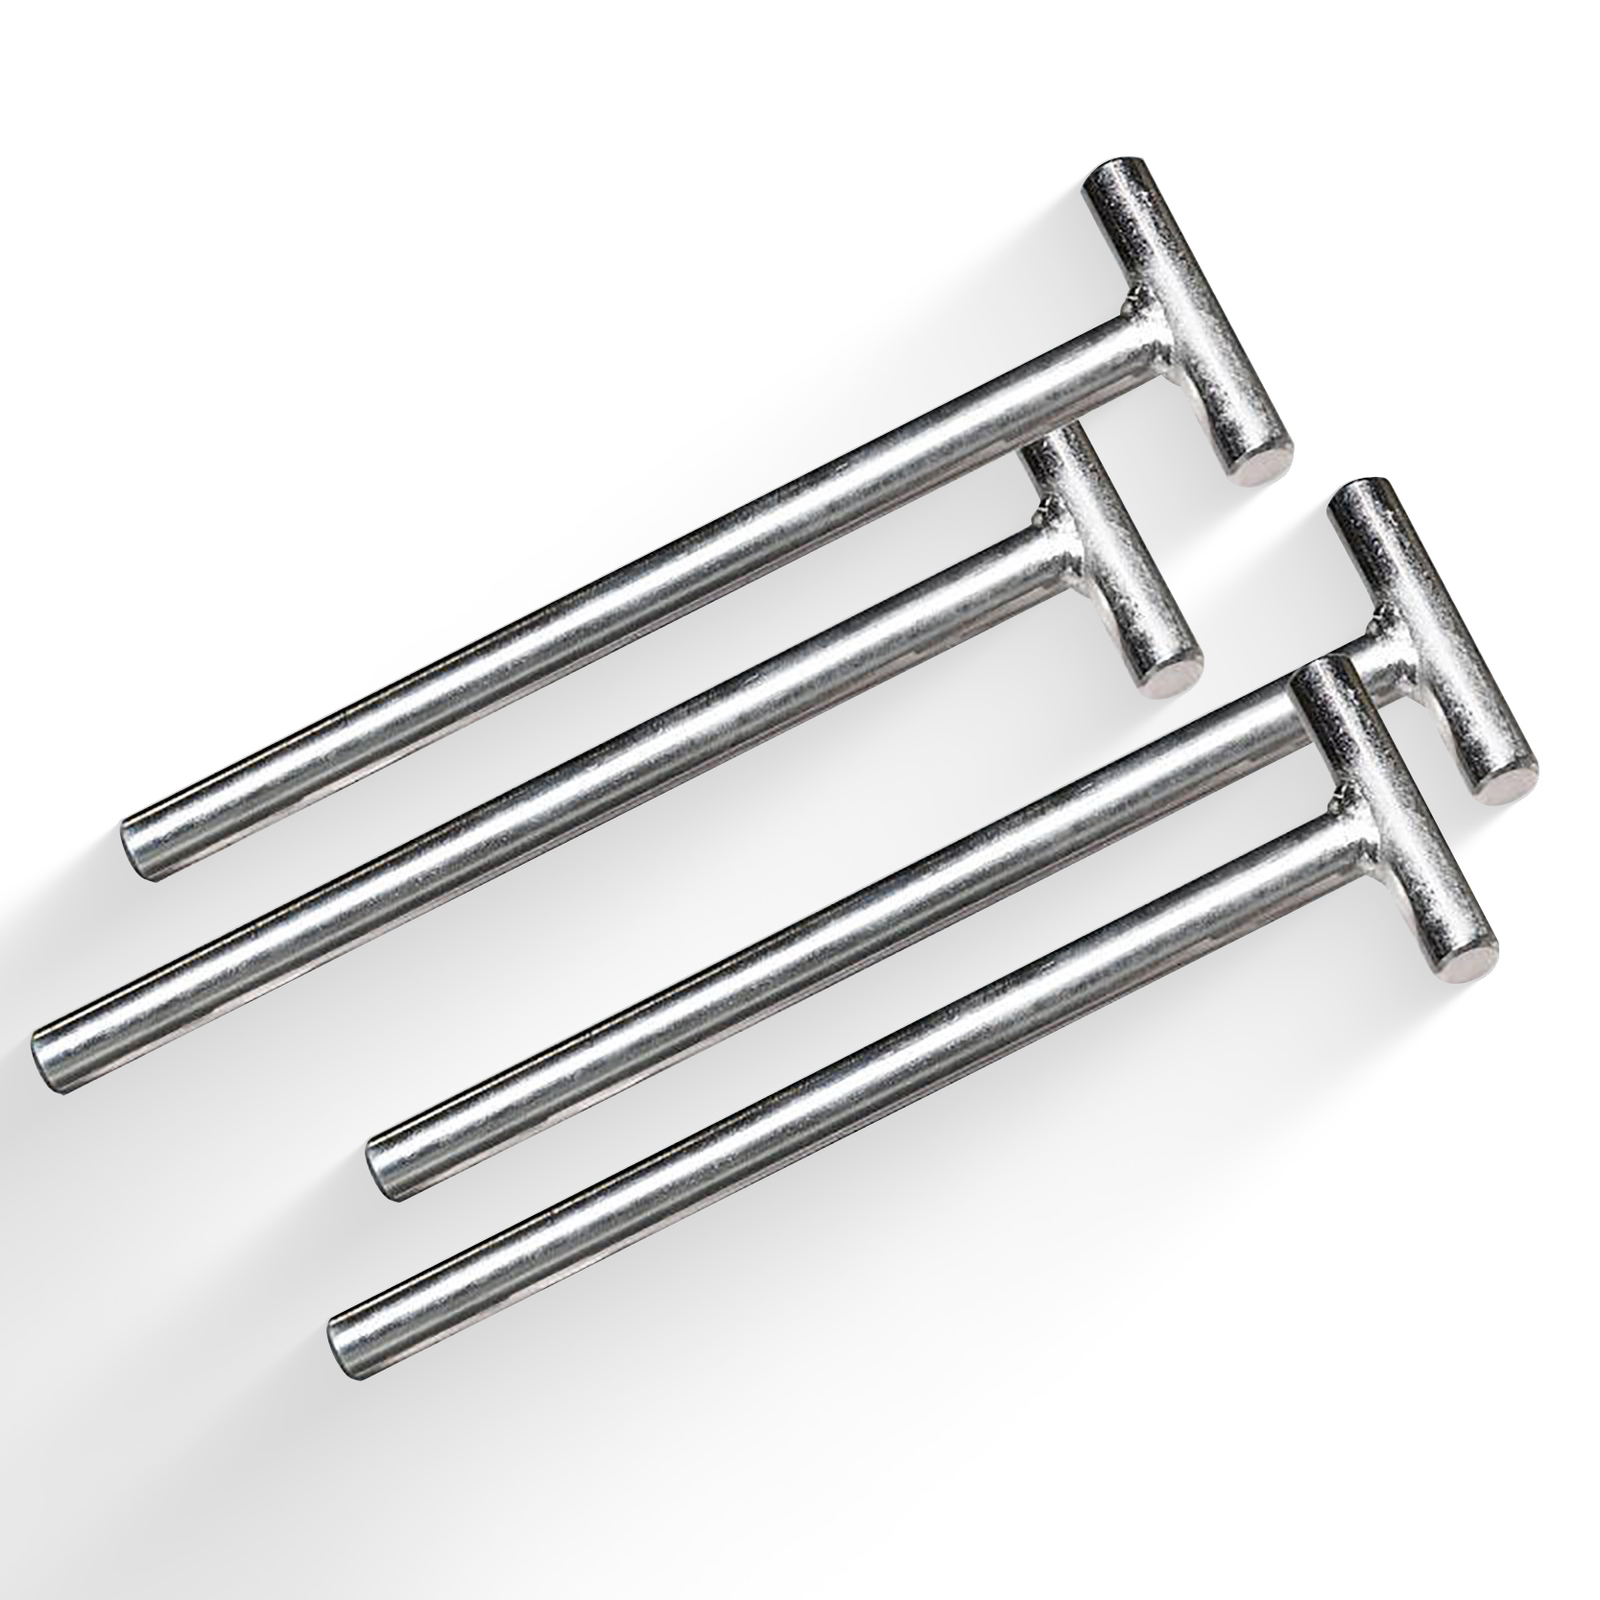 Competition 80x80 Rig/Rack - Band pegs - Set of 4 - Again Faster